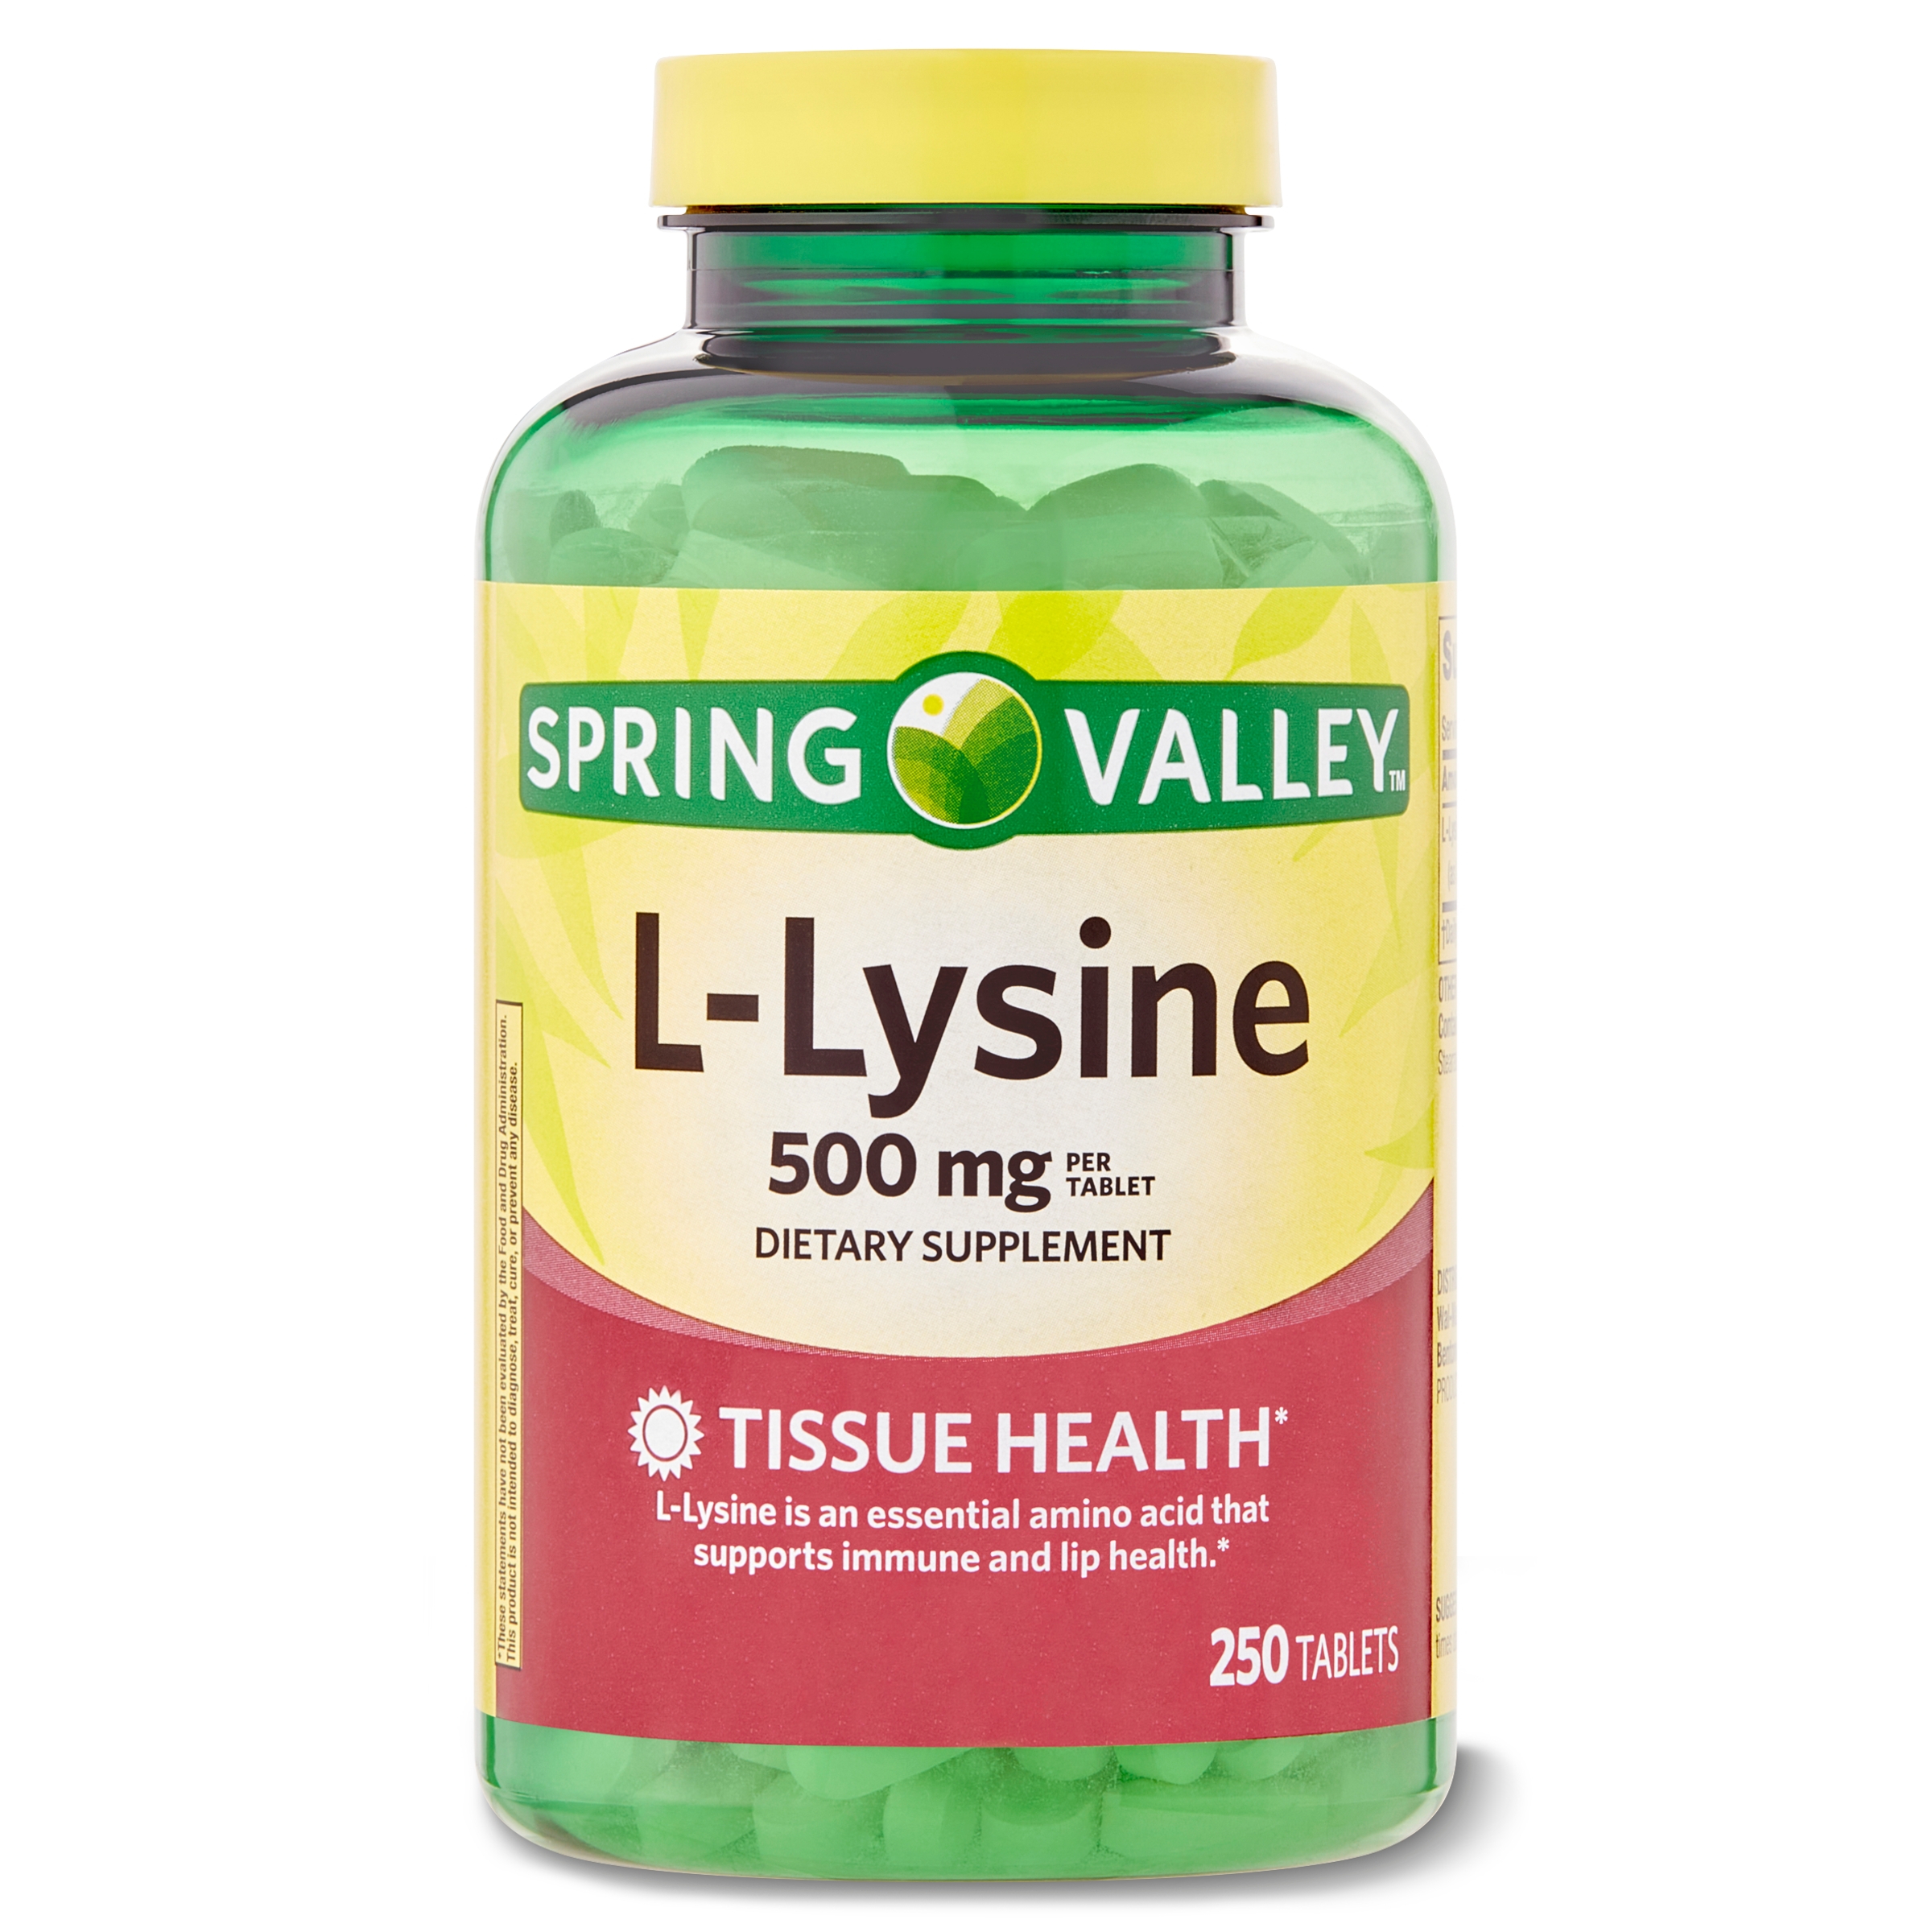 Spring Valley L-Lysine Dietary Supplement, 500 mg, 250 Count - image 1 of 9